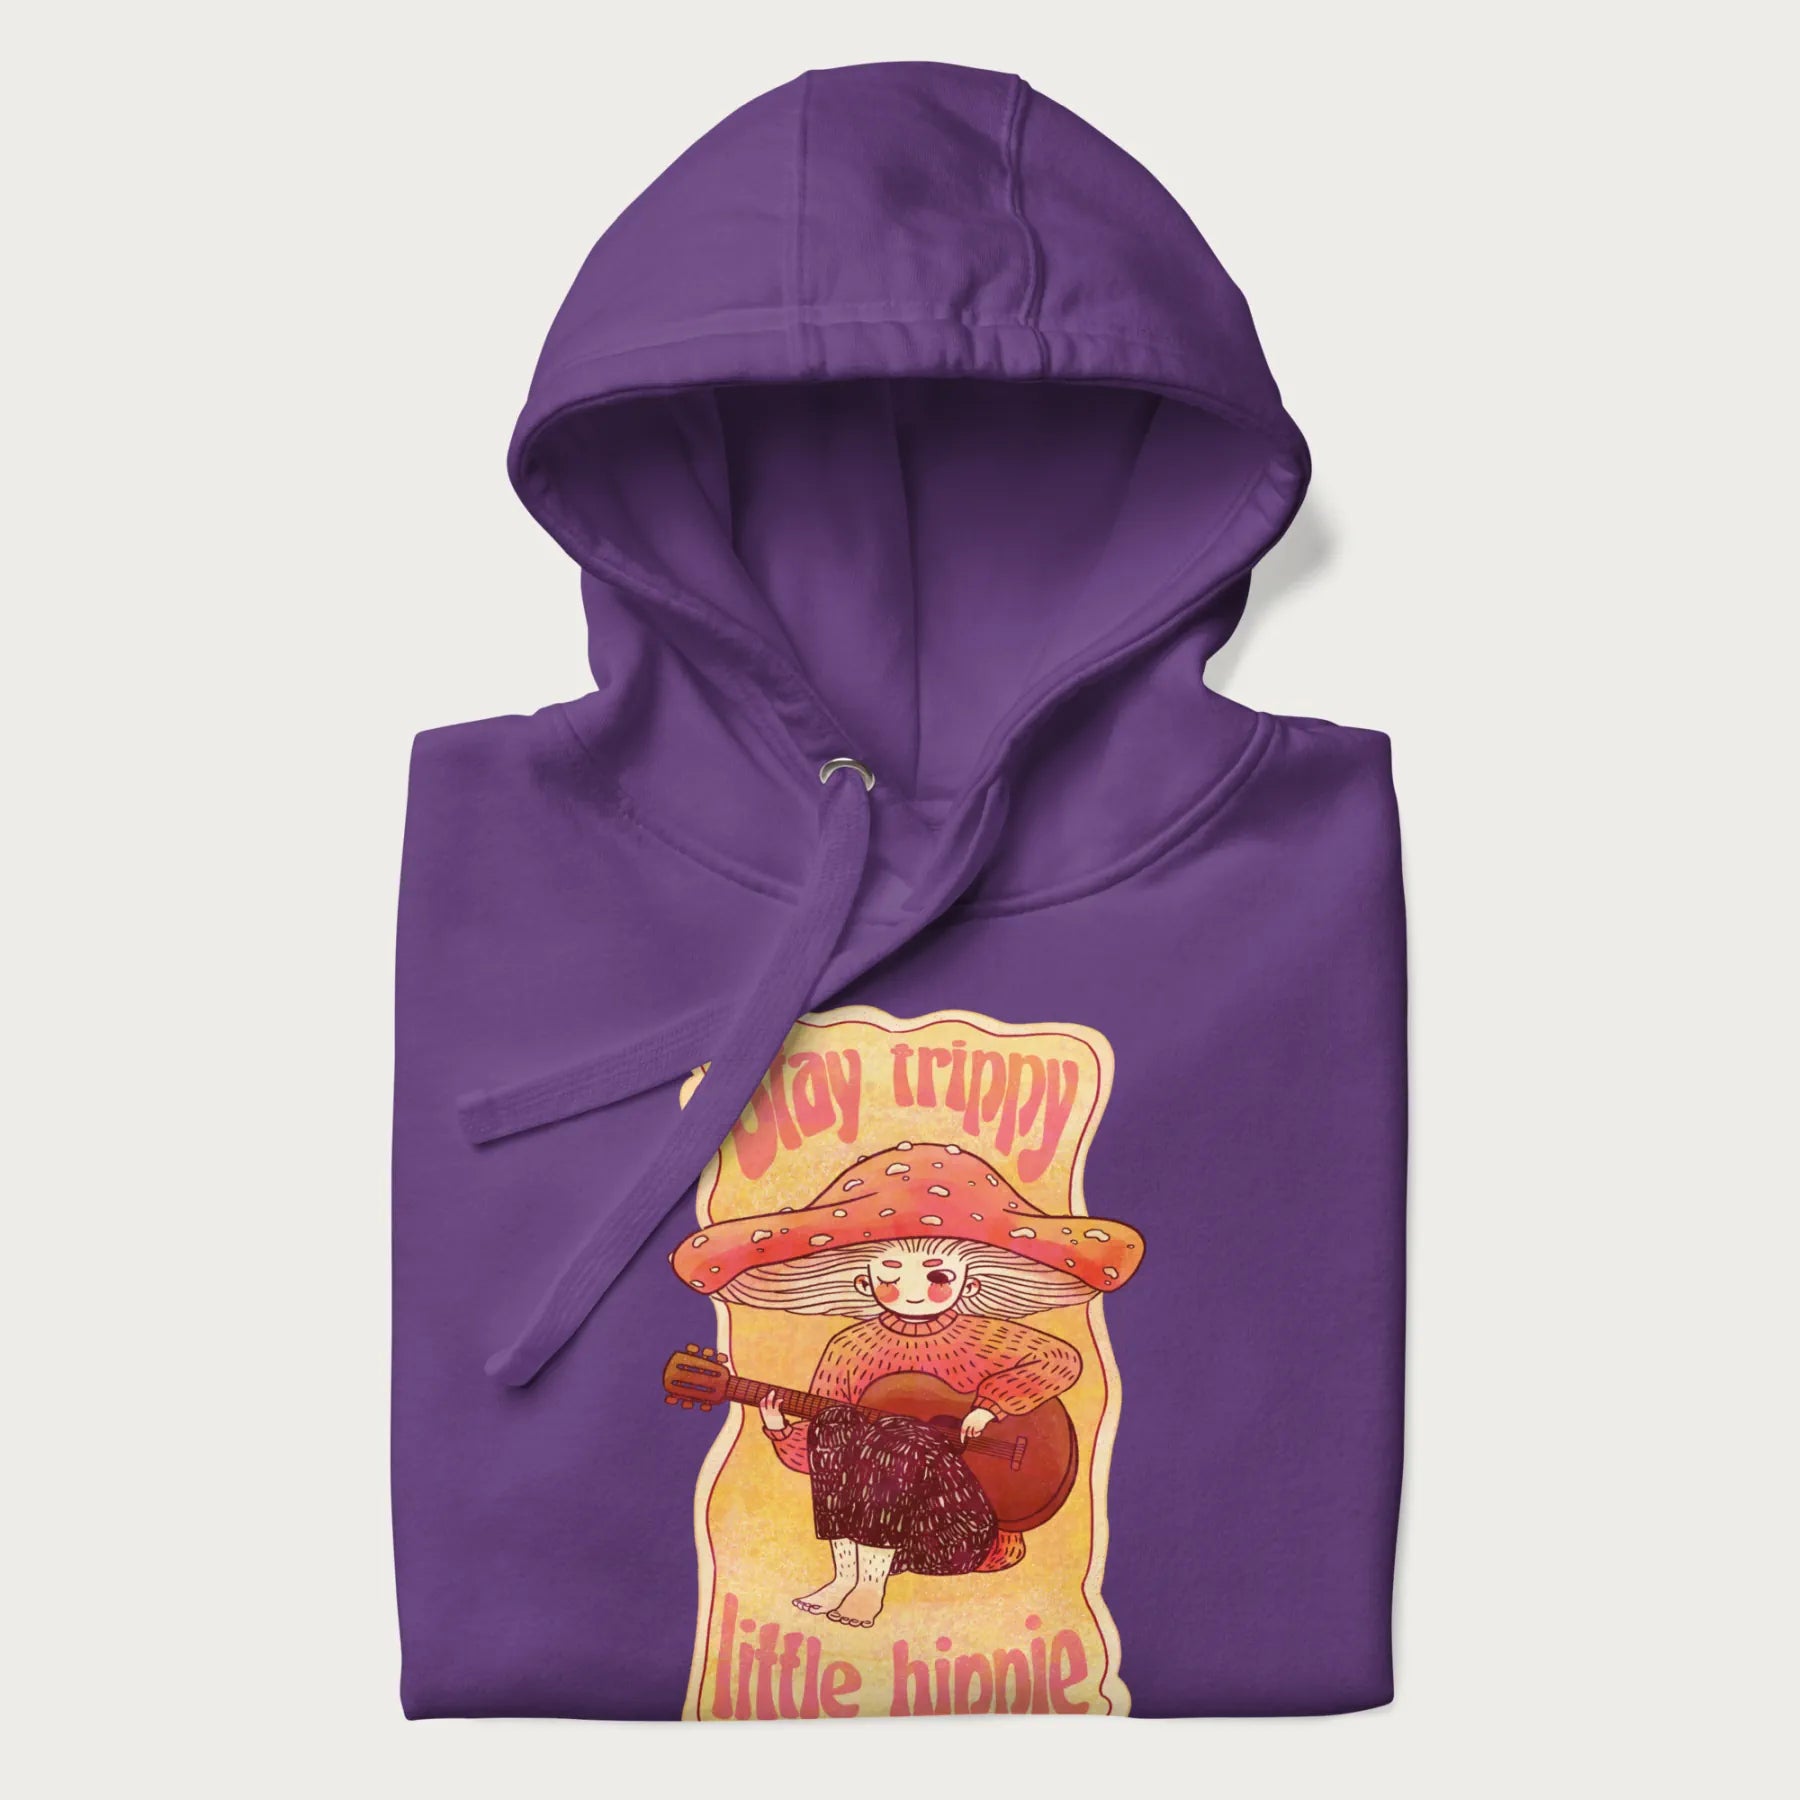 Folded purple hoodie with a graphic of a character with a mushroom cap playing a guitar and the text 'Stay Trippy Little Hippie.'